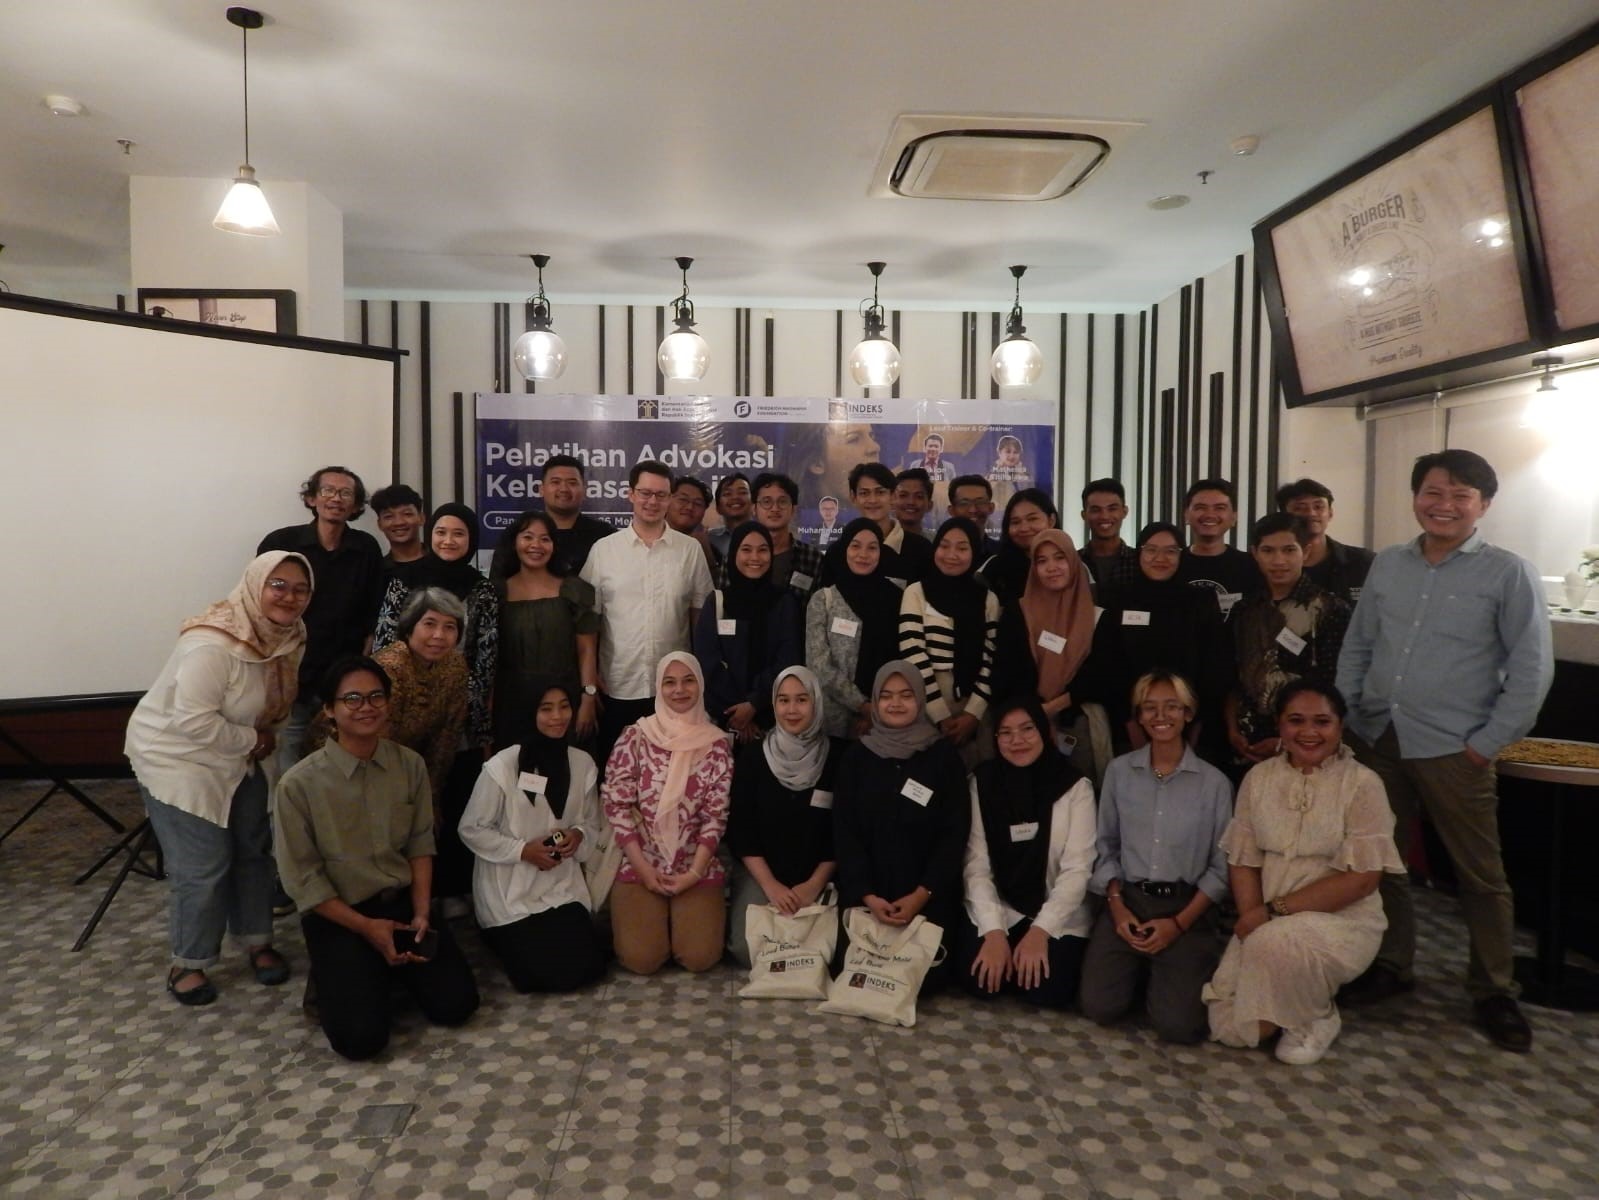 Participants of the event standing alongside Dr. Stefan Diederich, Project Director of FNF Indonesia, in front of a banner showing the event's details.